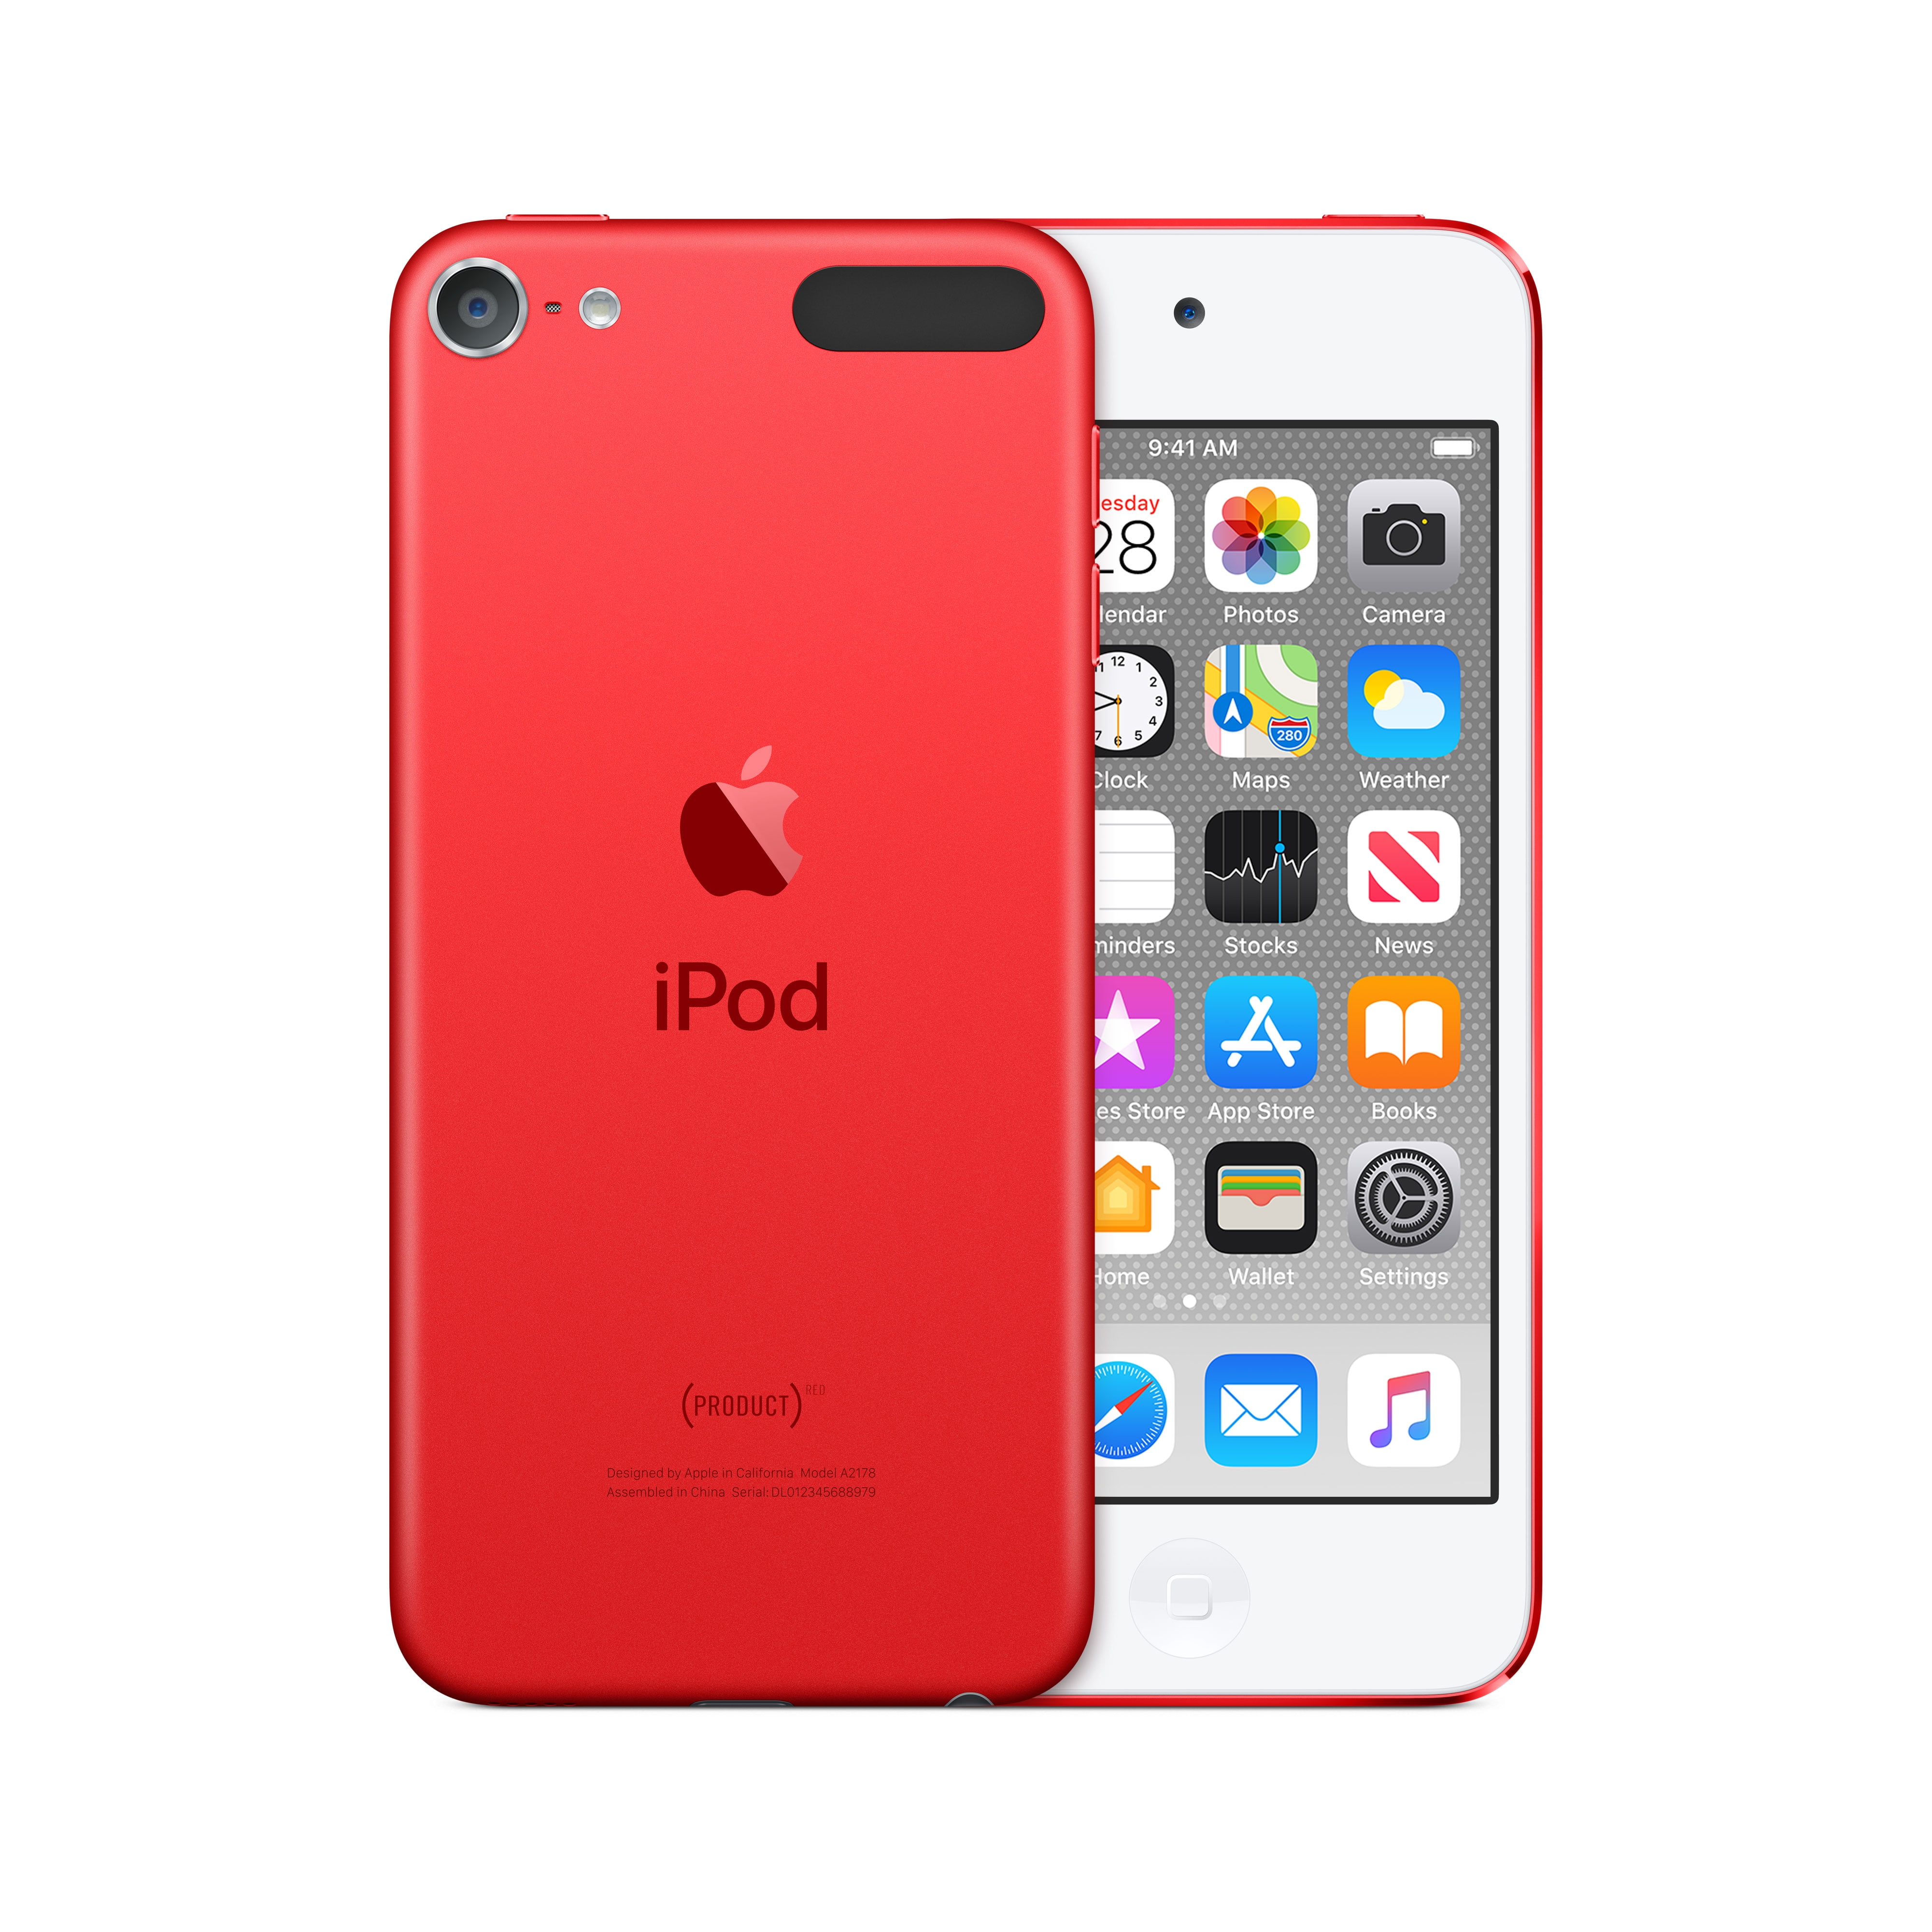 Apple iPod touch 7th Generation 32GB - PRODUCT(RED) (New Model)